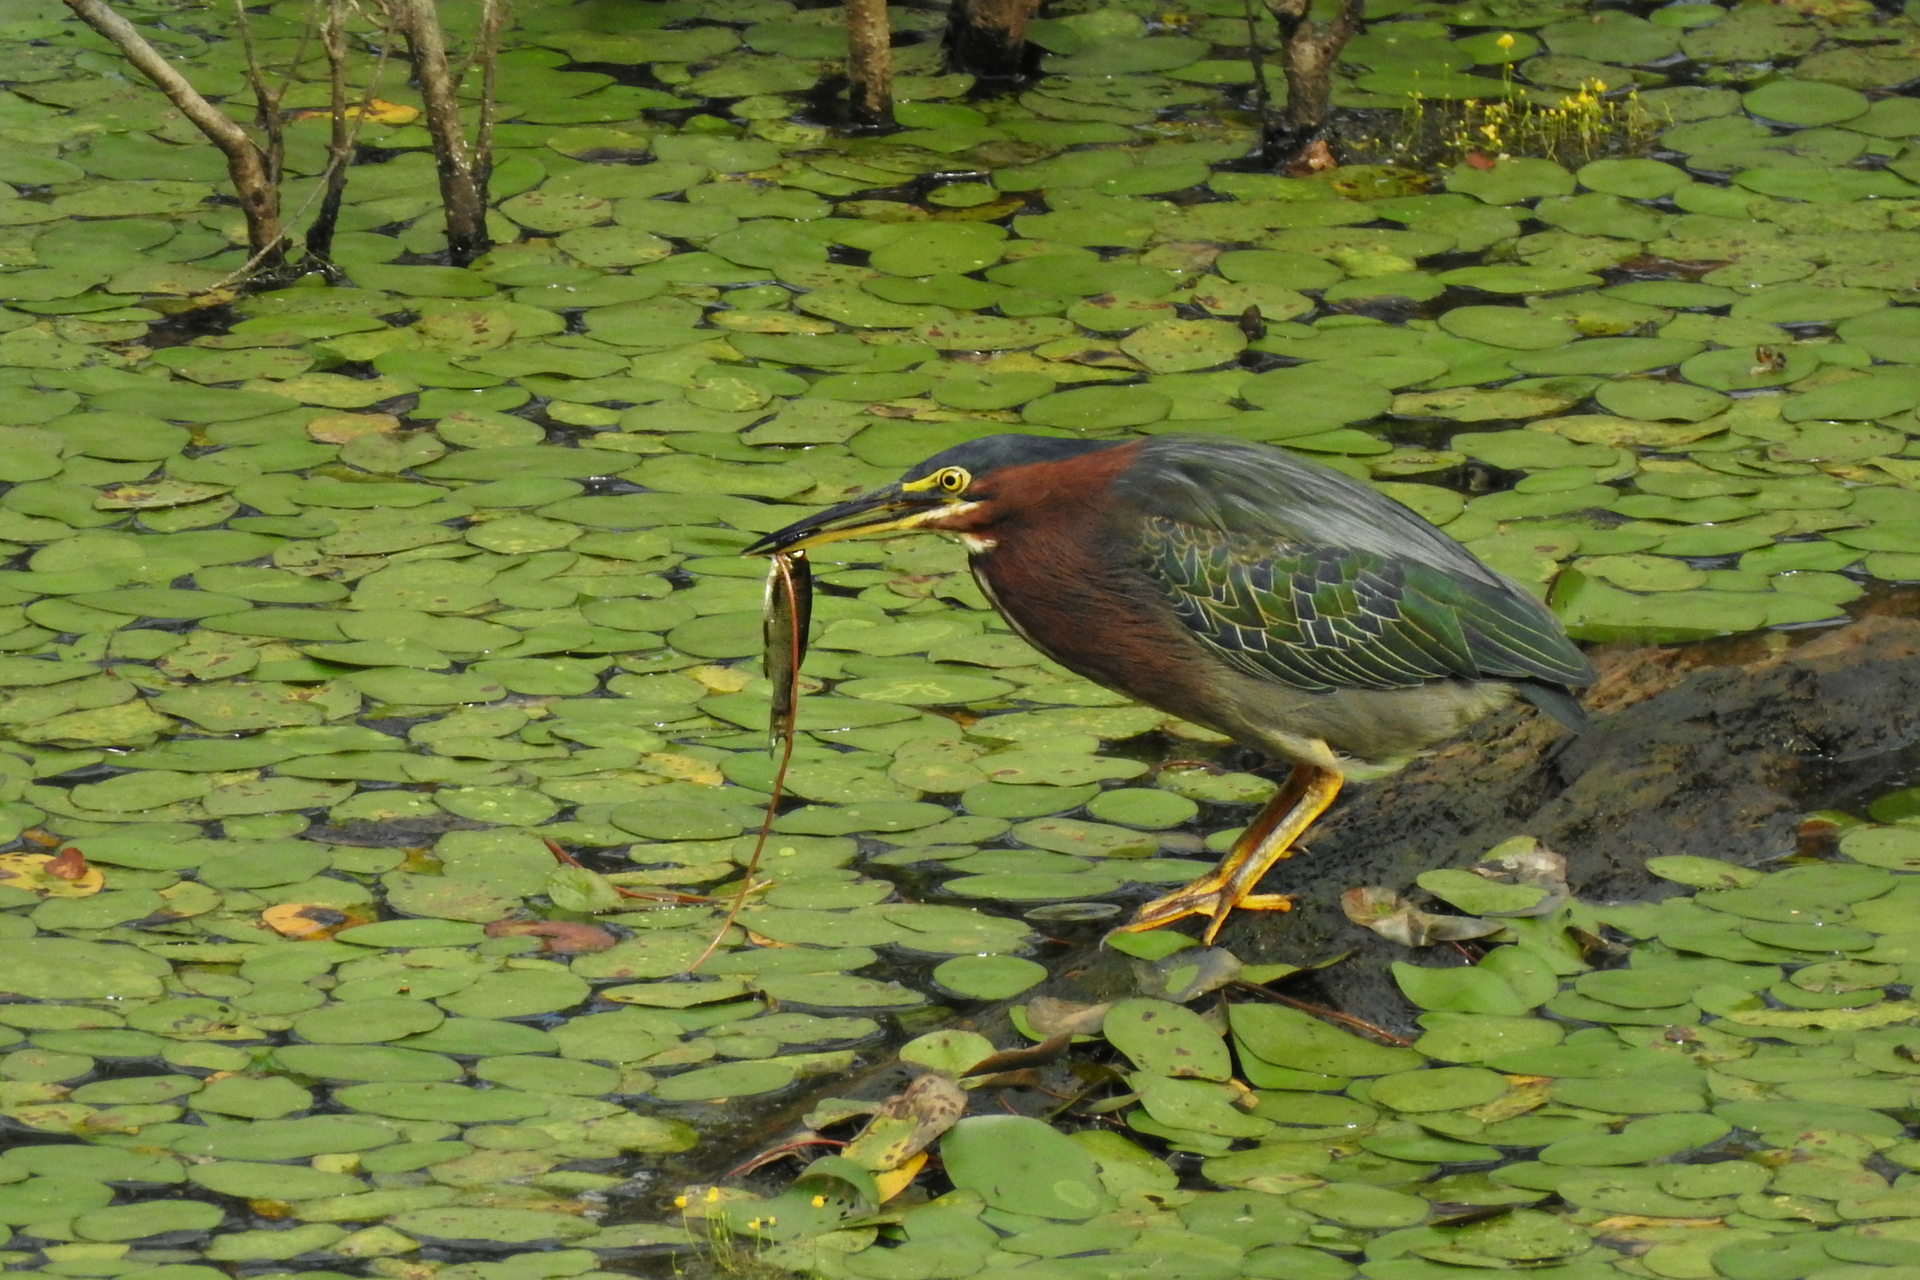 Green Heron perched on a log, surrounded by Lily Pads with a fish in its beak.